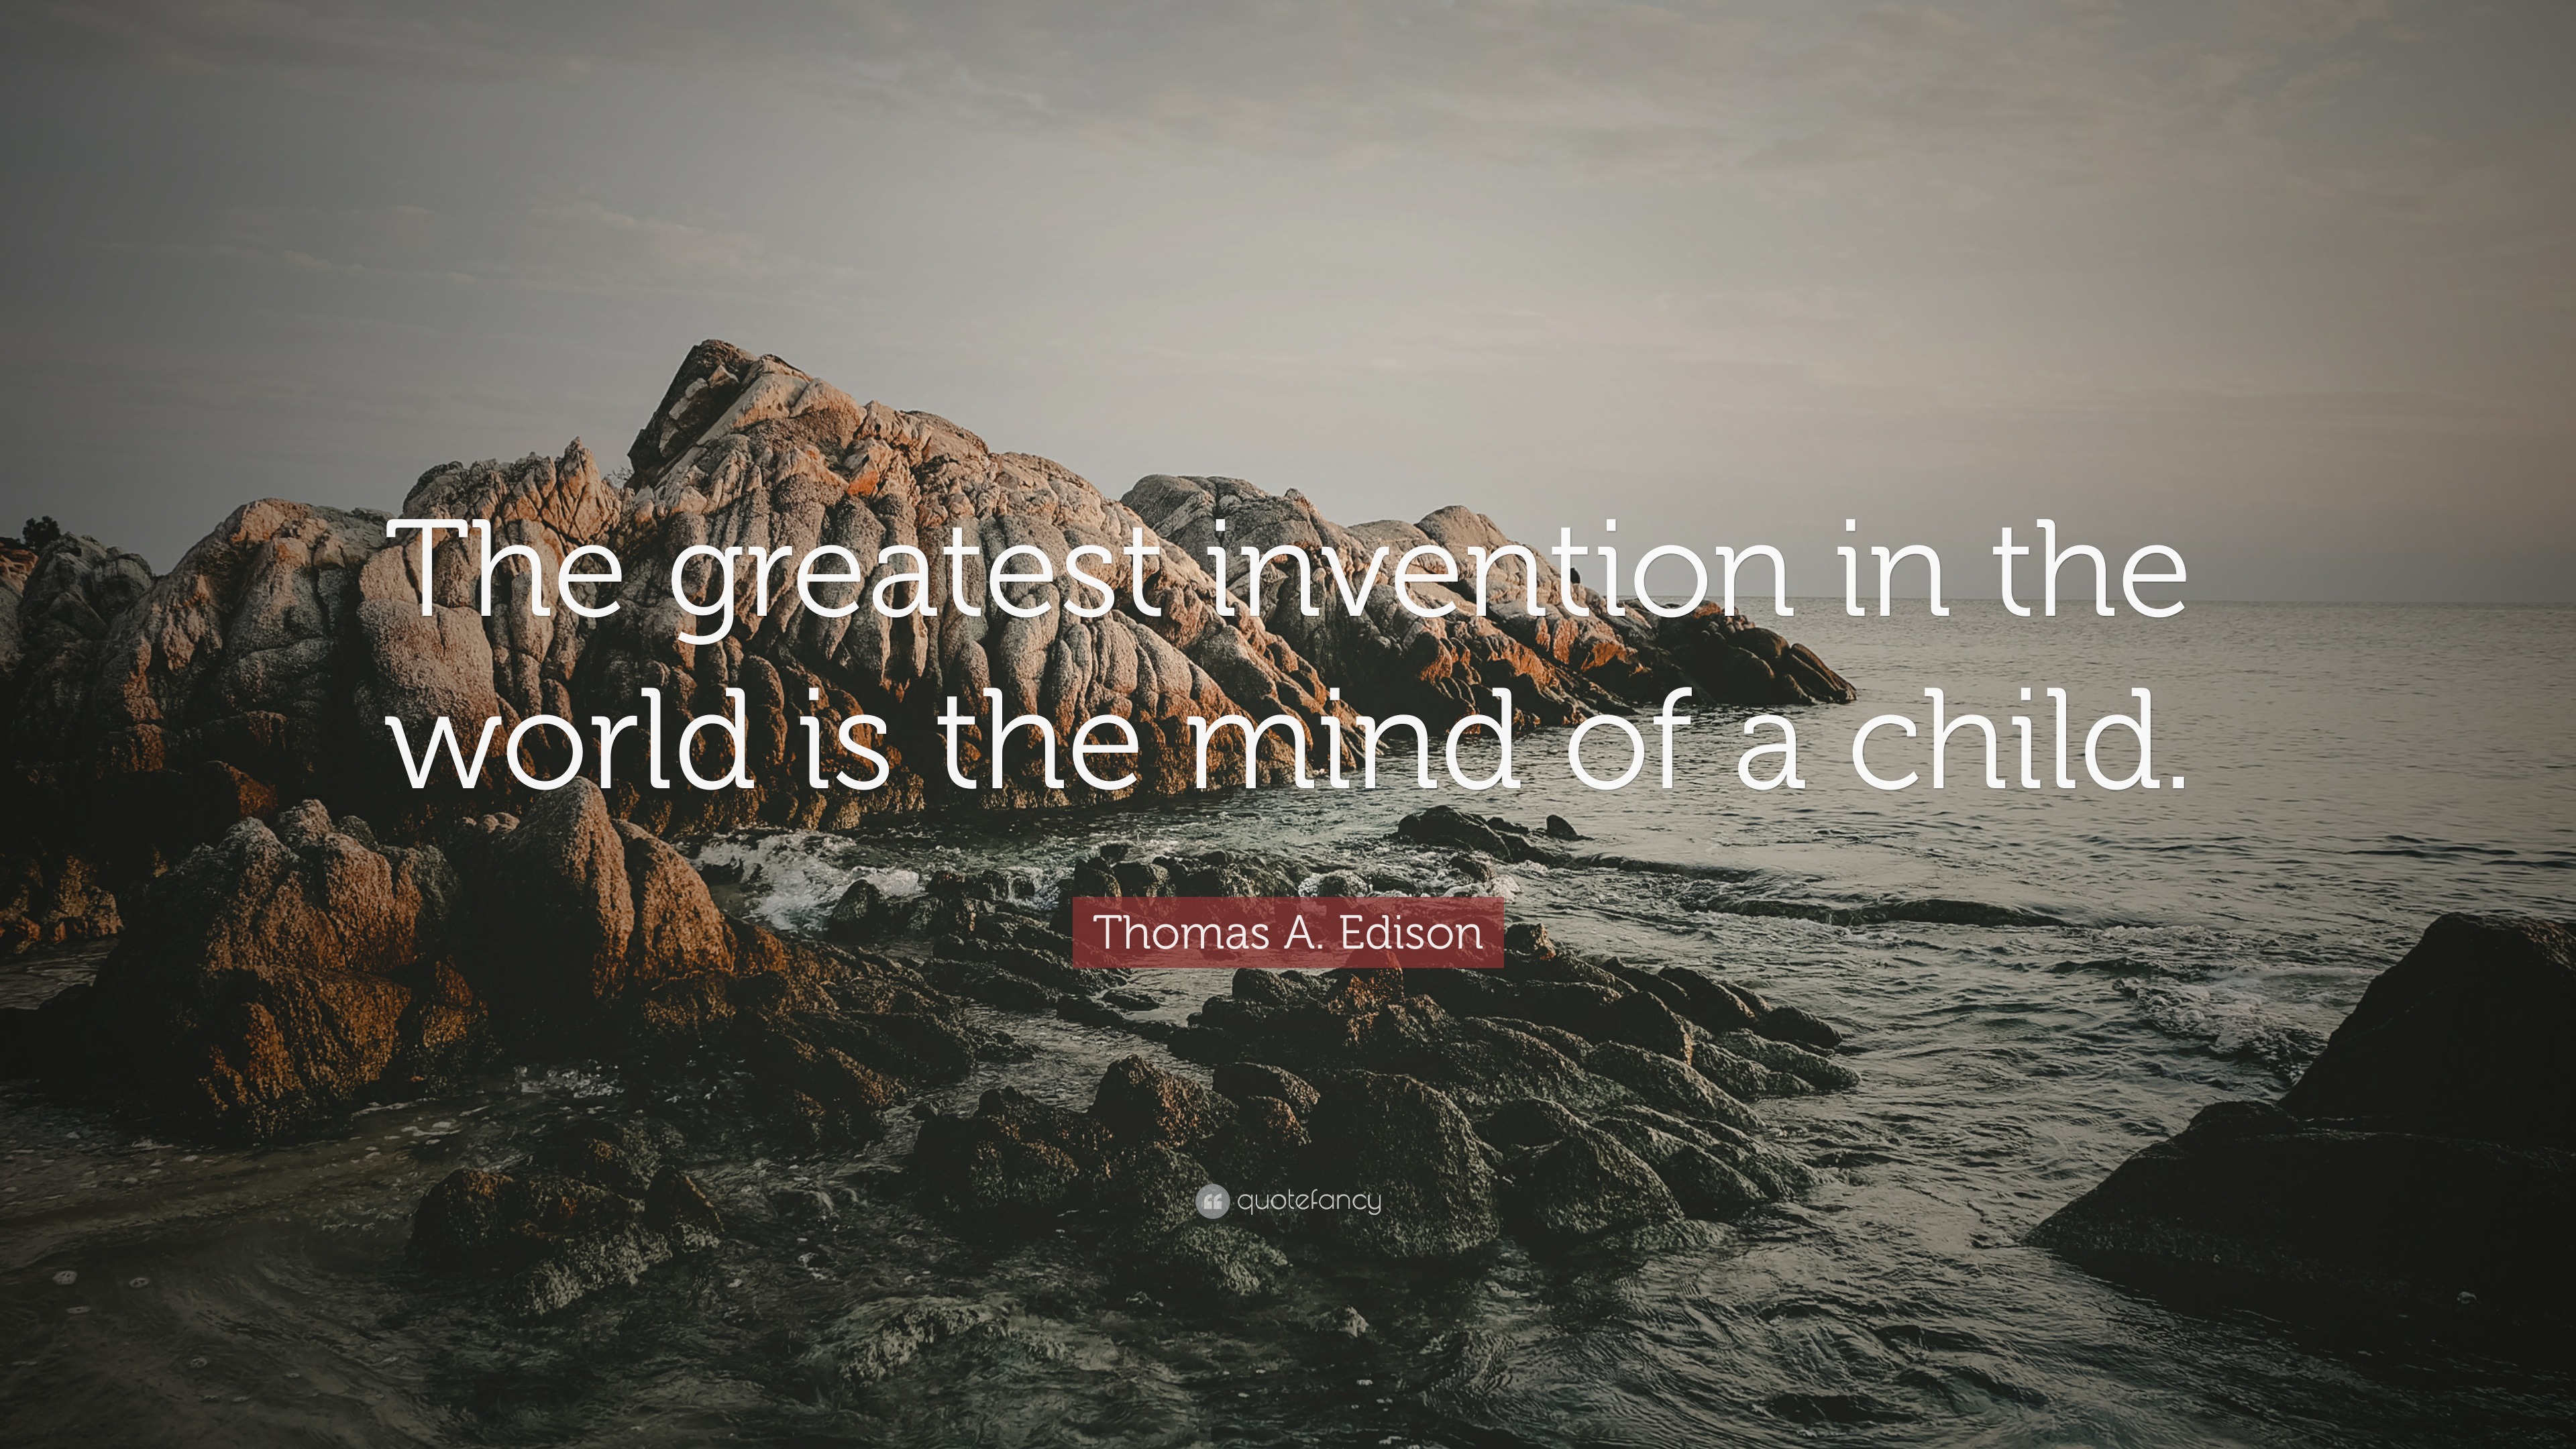 Thomas A. Edison Quote: “The greatest invention in the world is